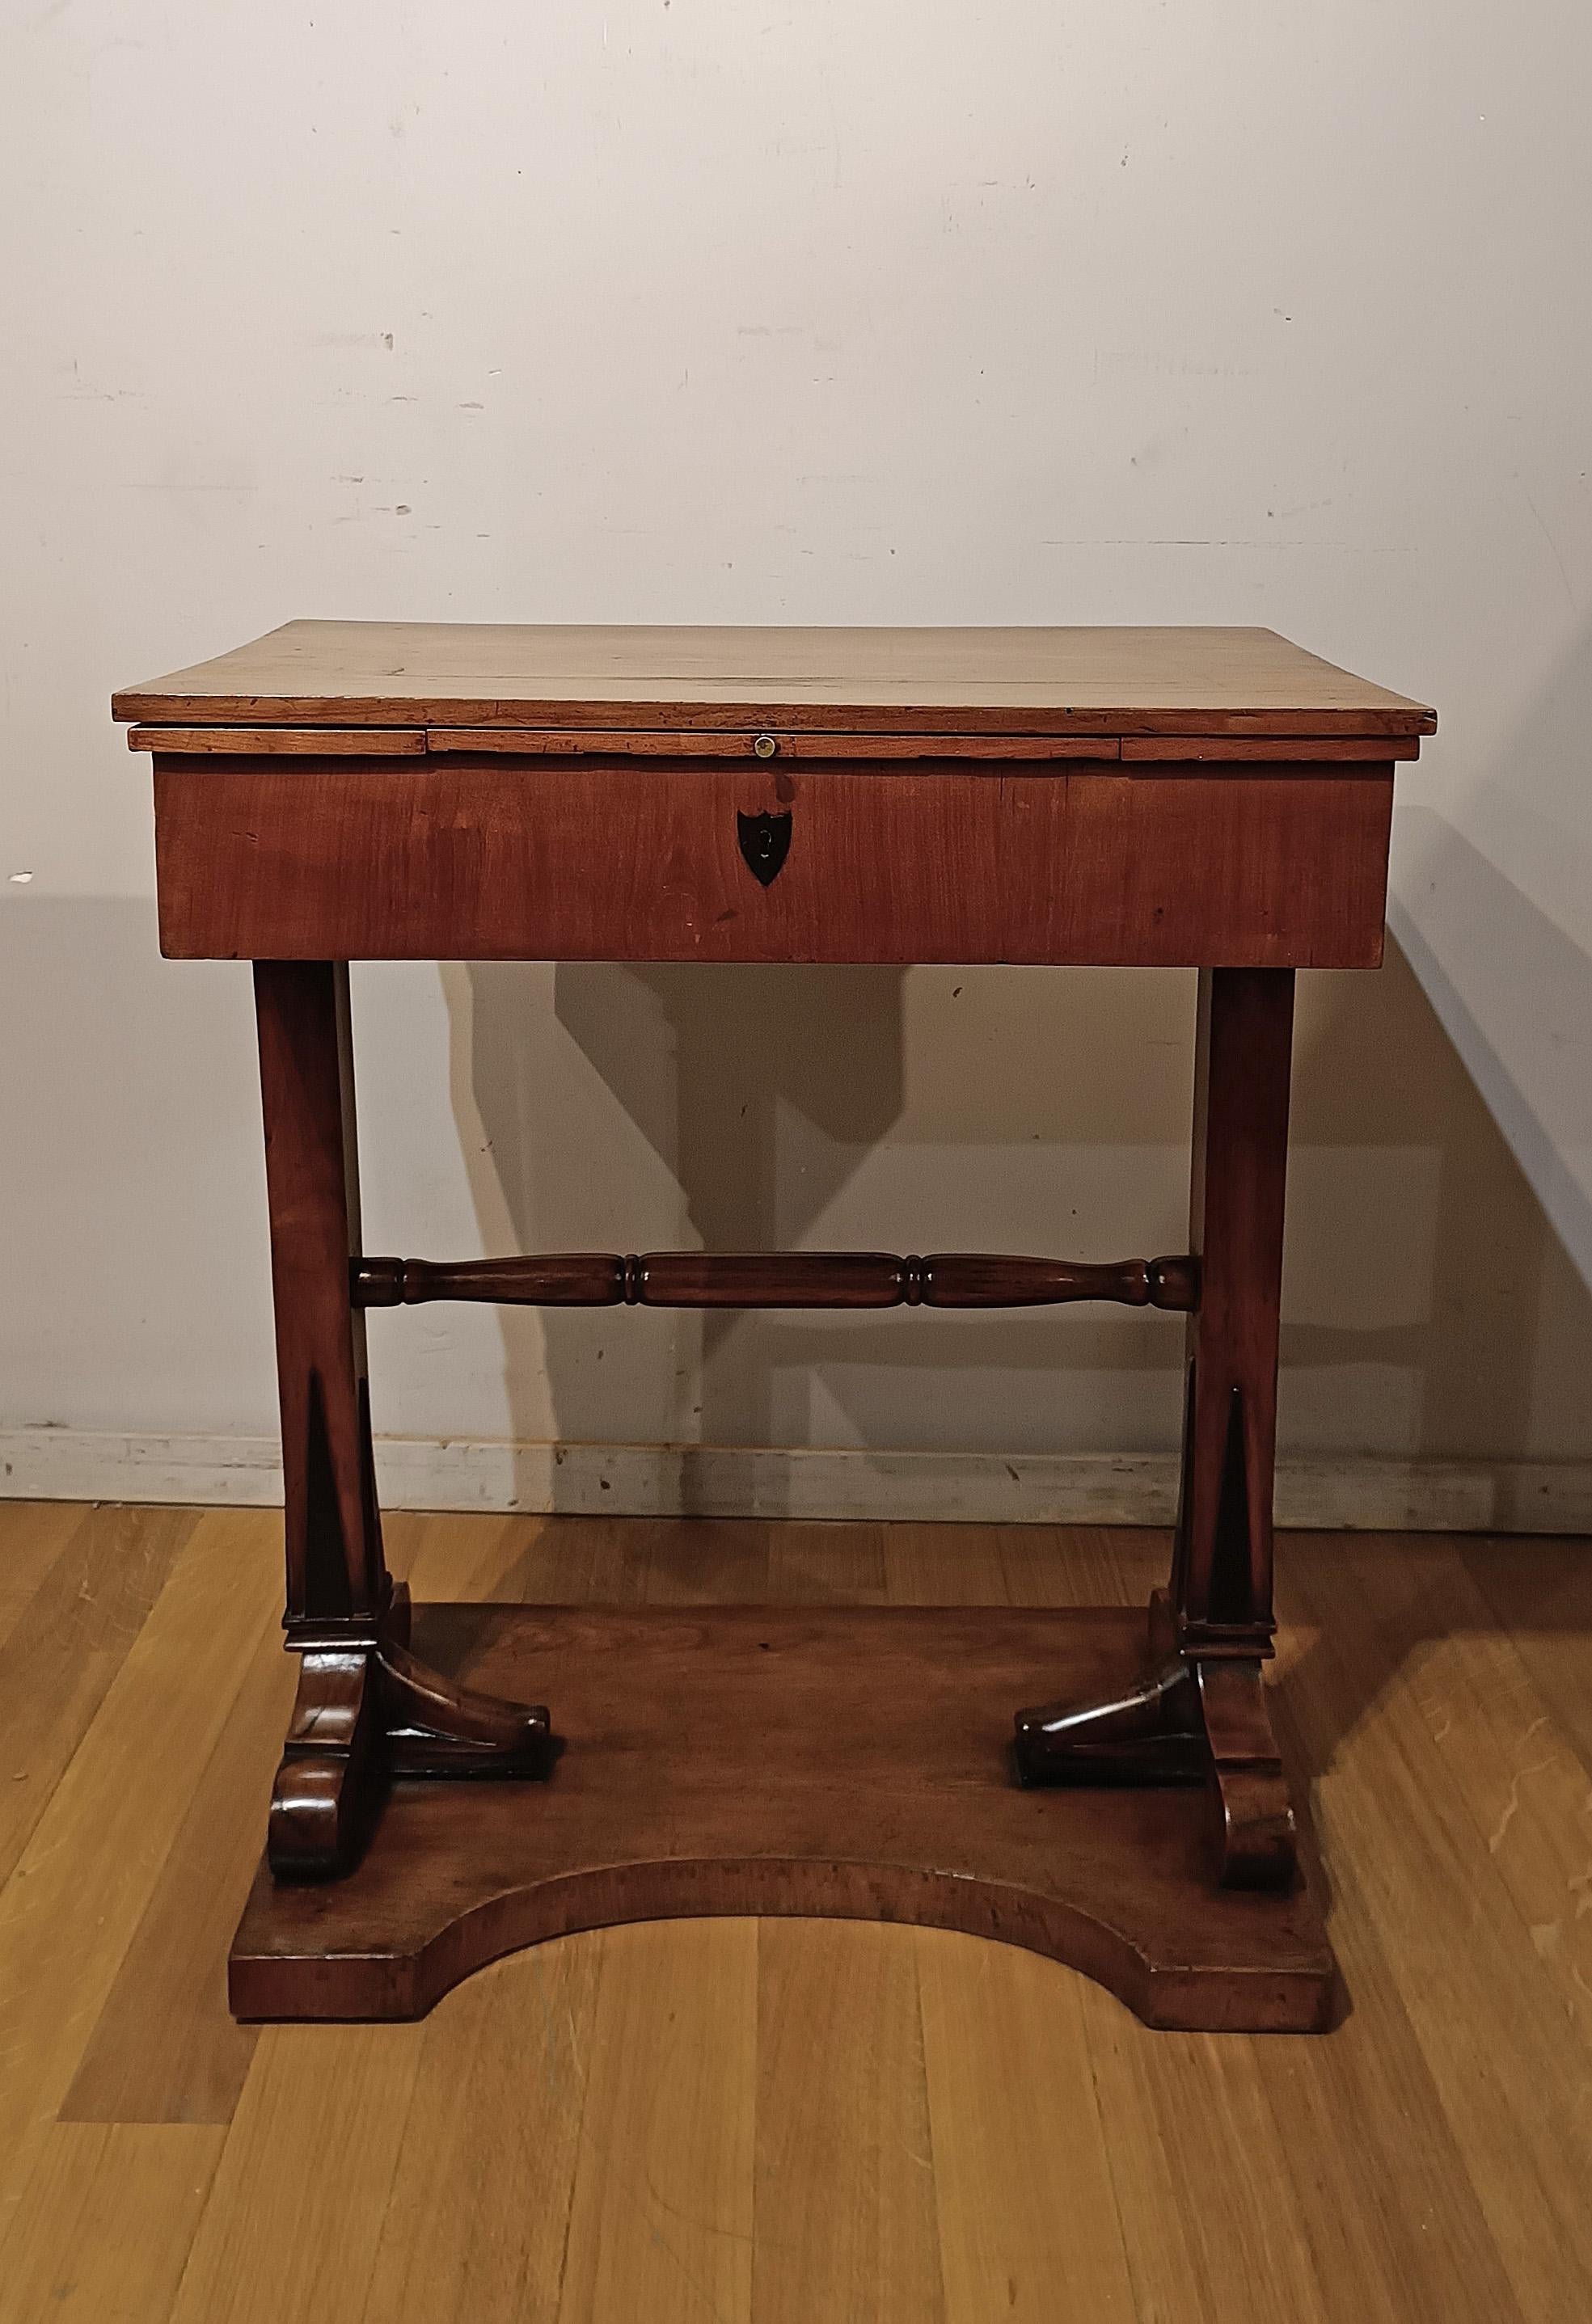 This splendid and refined cherry working table, of Tuscan manufacture from the early 19th century, is a unique piece that can also be used as a small desk. Its ancient function was that of a work table, as demonstrated by the presence of internal